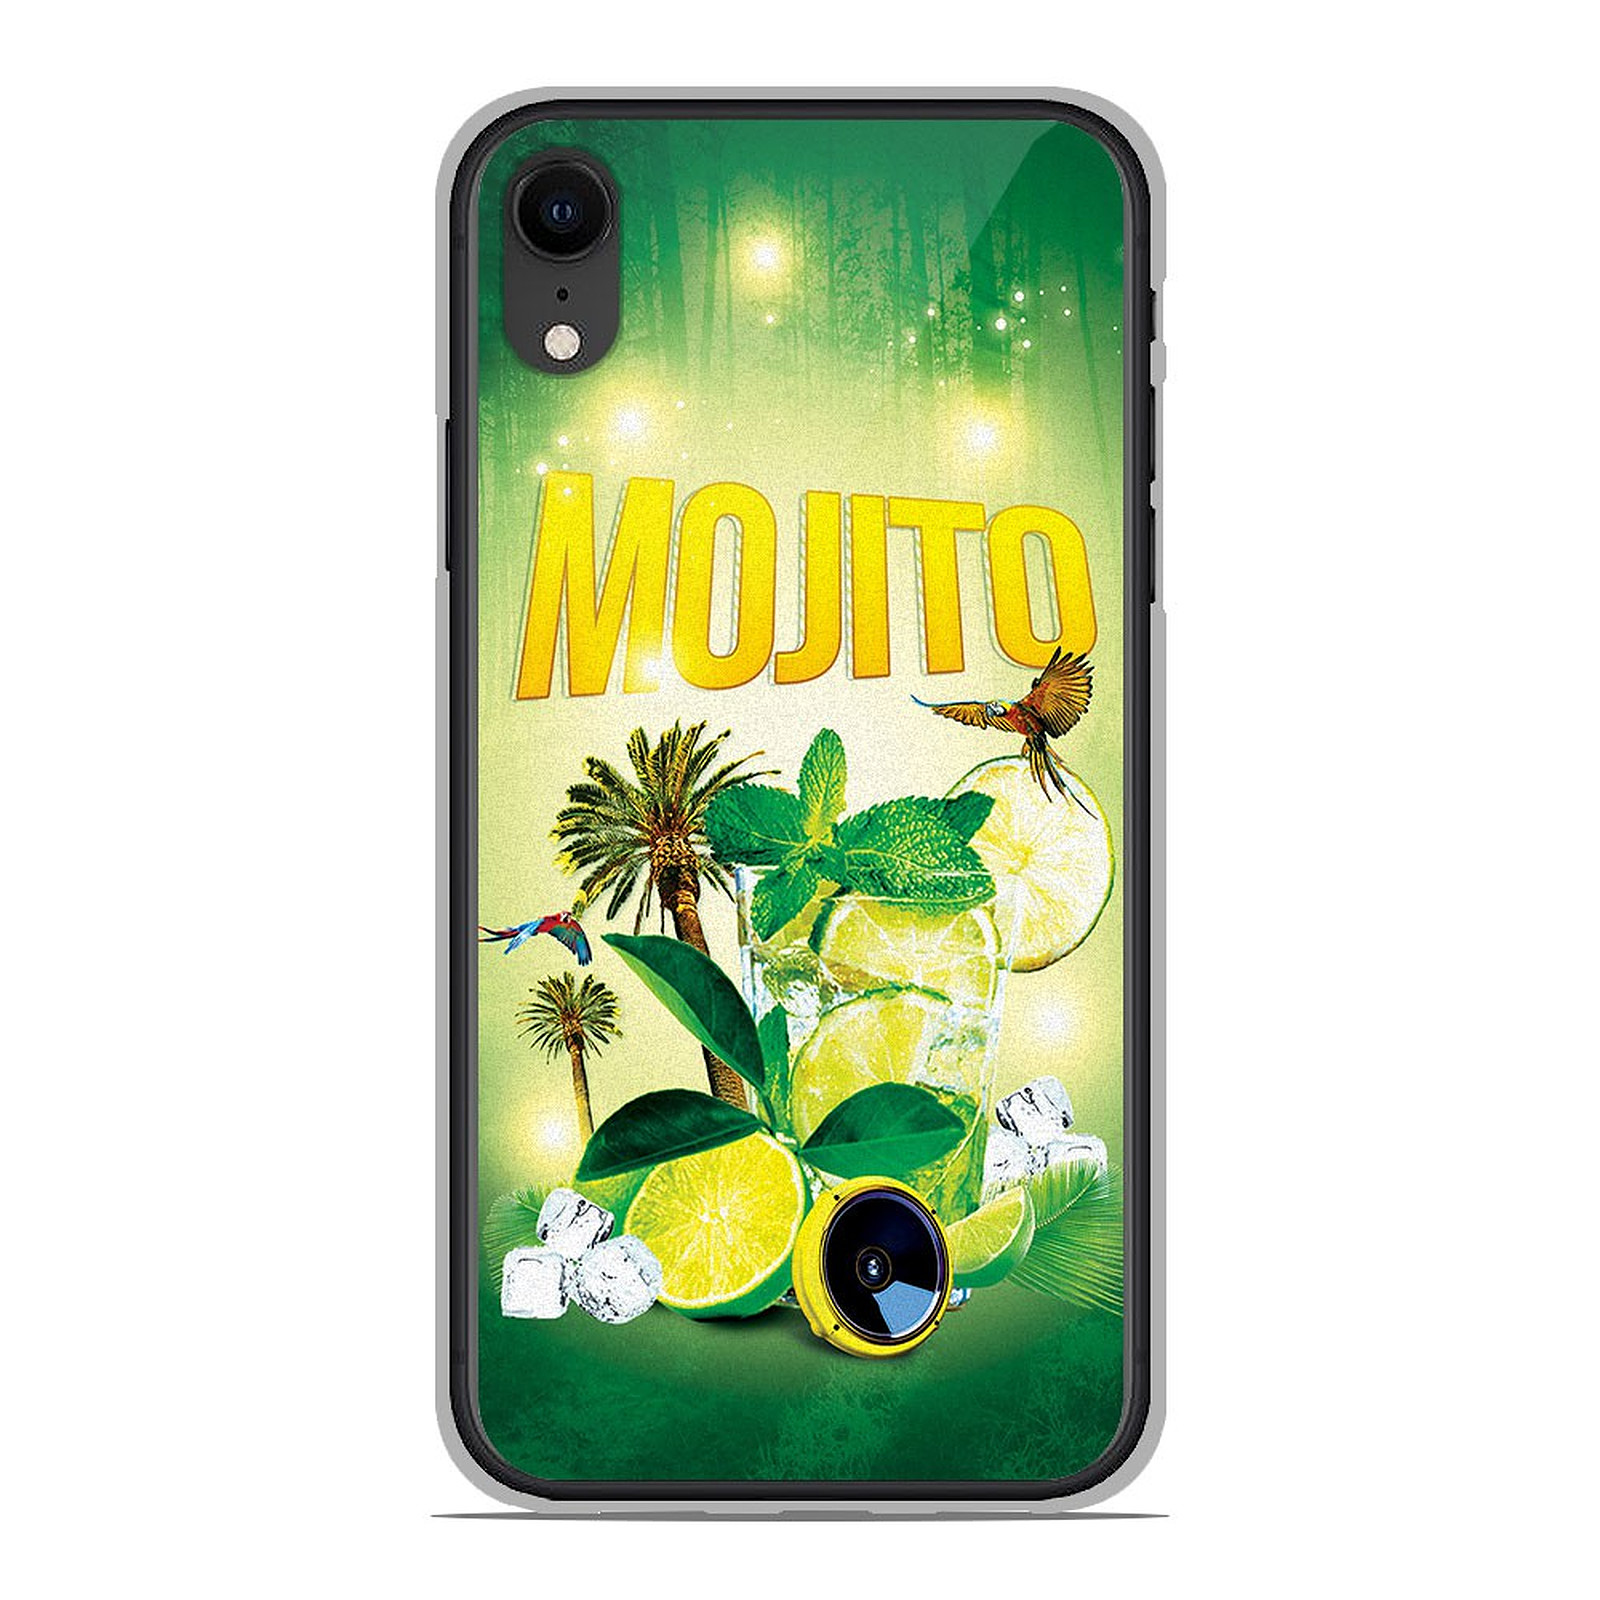 1001 Coques Coque silicone gel Apple iPhone XR motif Mojito Foret - Coque telephone 1001Coques